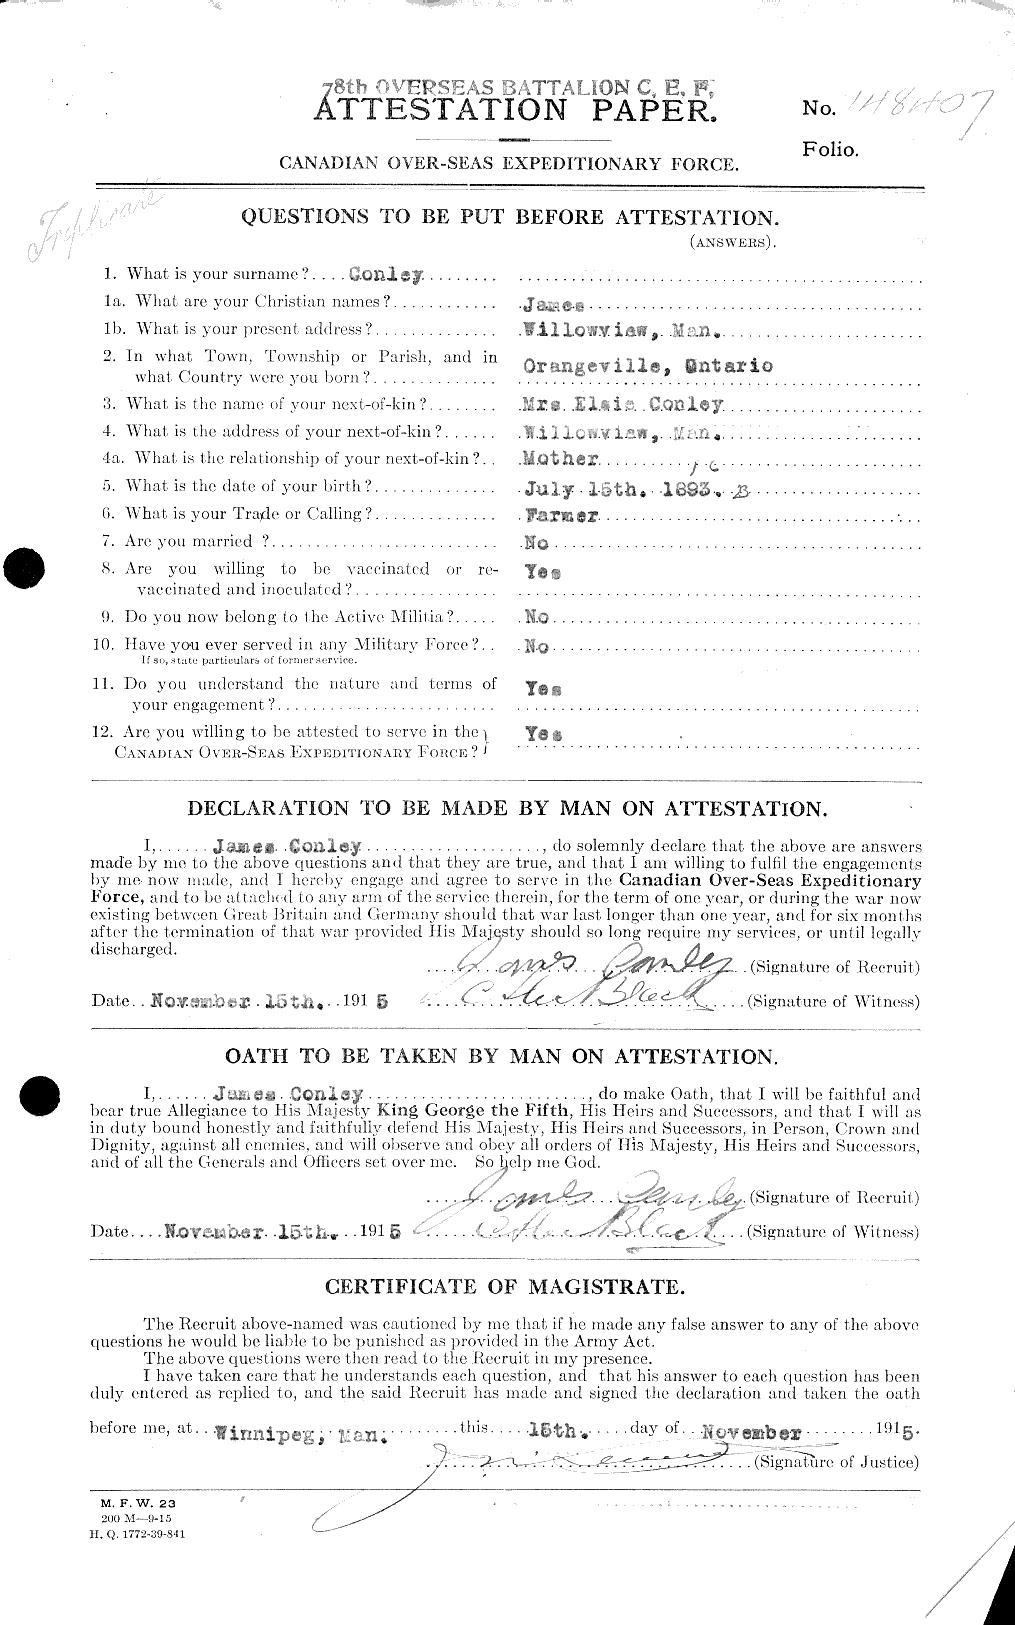 Personnel Records of the First World War - CEF 031450a